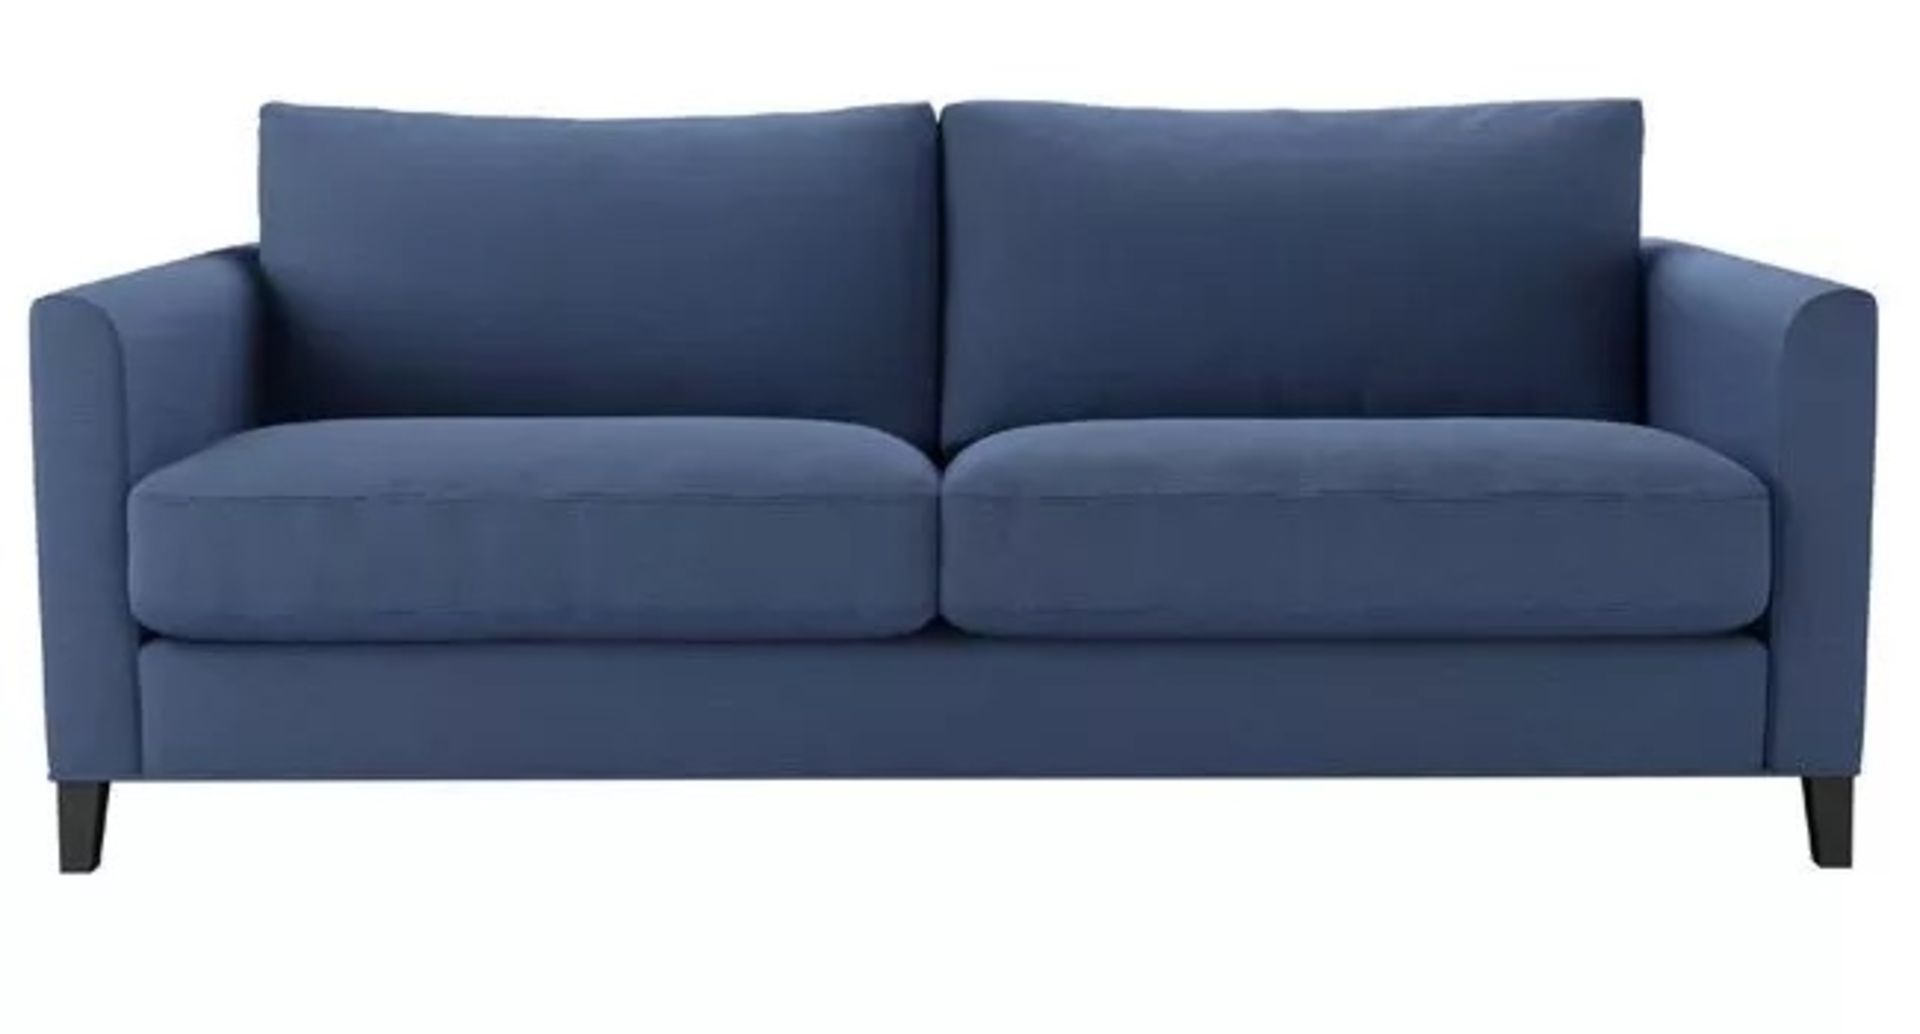 Izzy 3 Seat Sofa In Oxford Blue Brushed Linen Cotton RRP - £2110